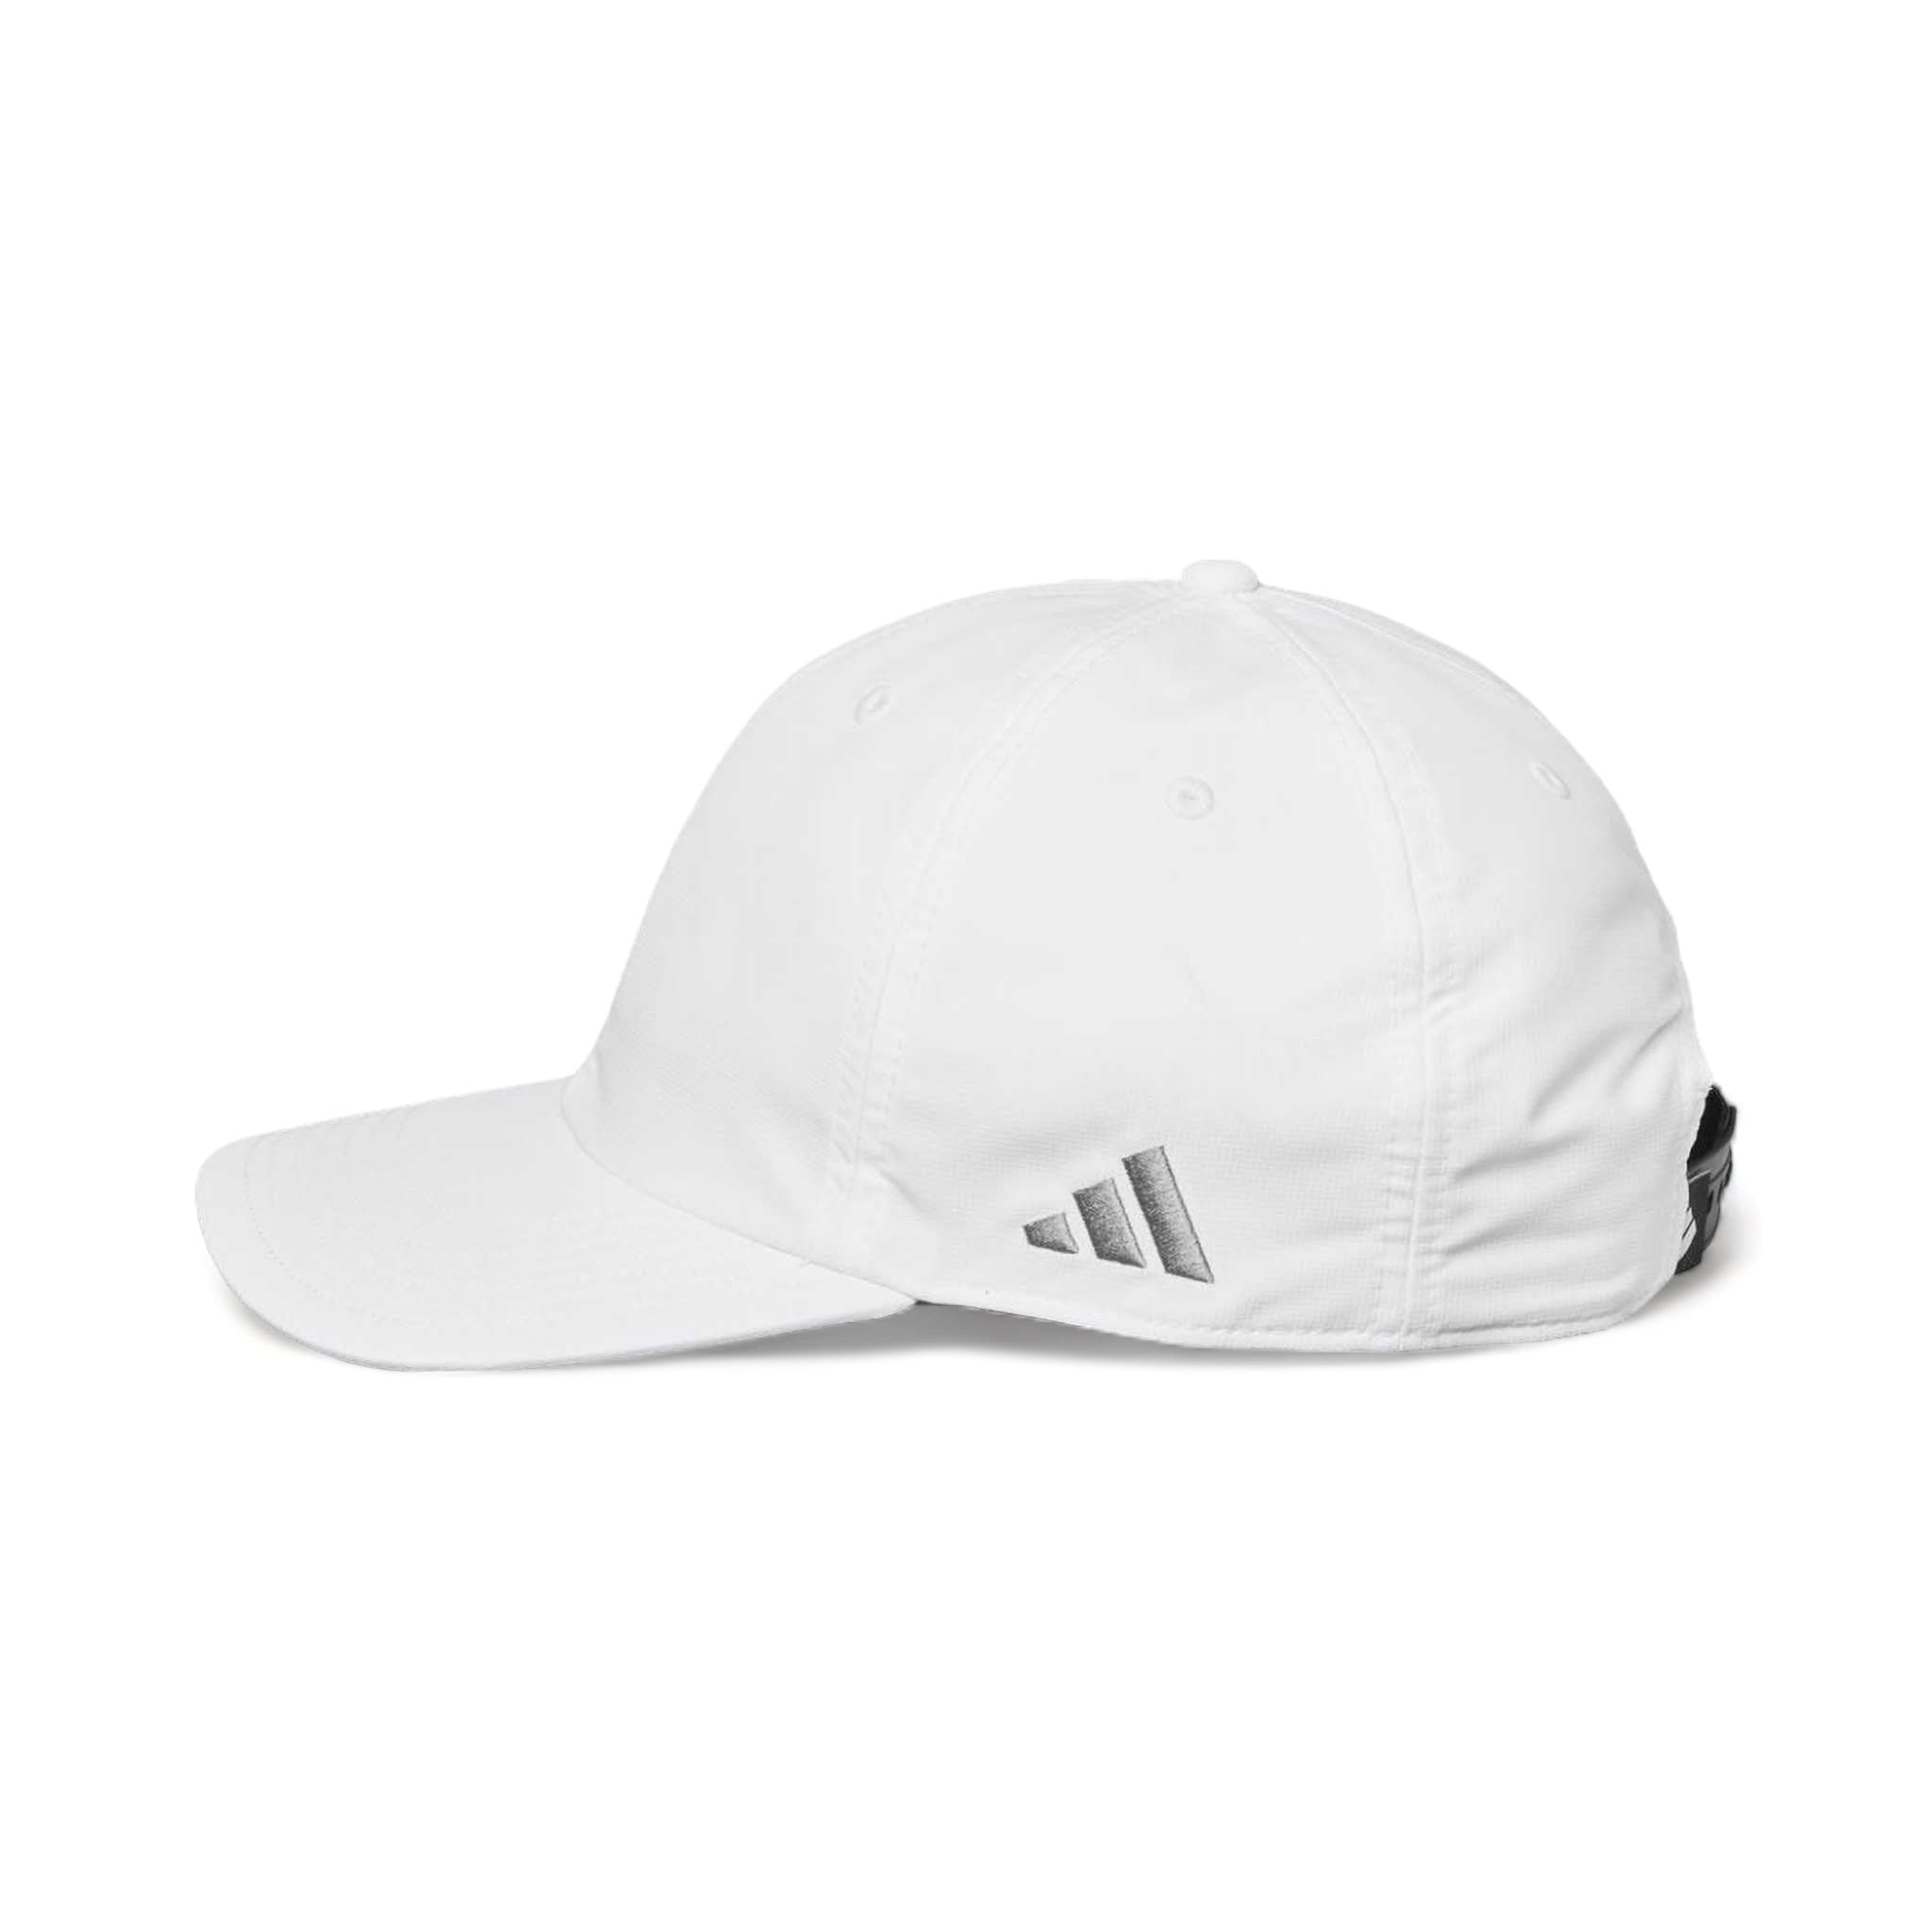 Side view of Adidas A600S custom hat in white